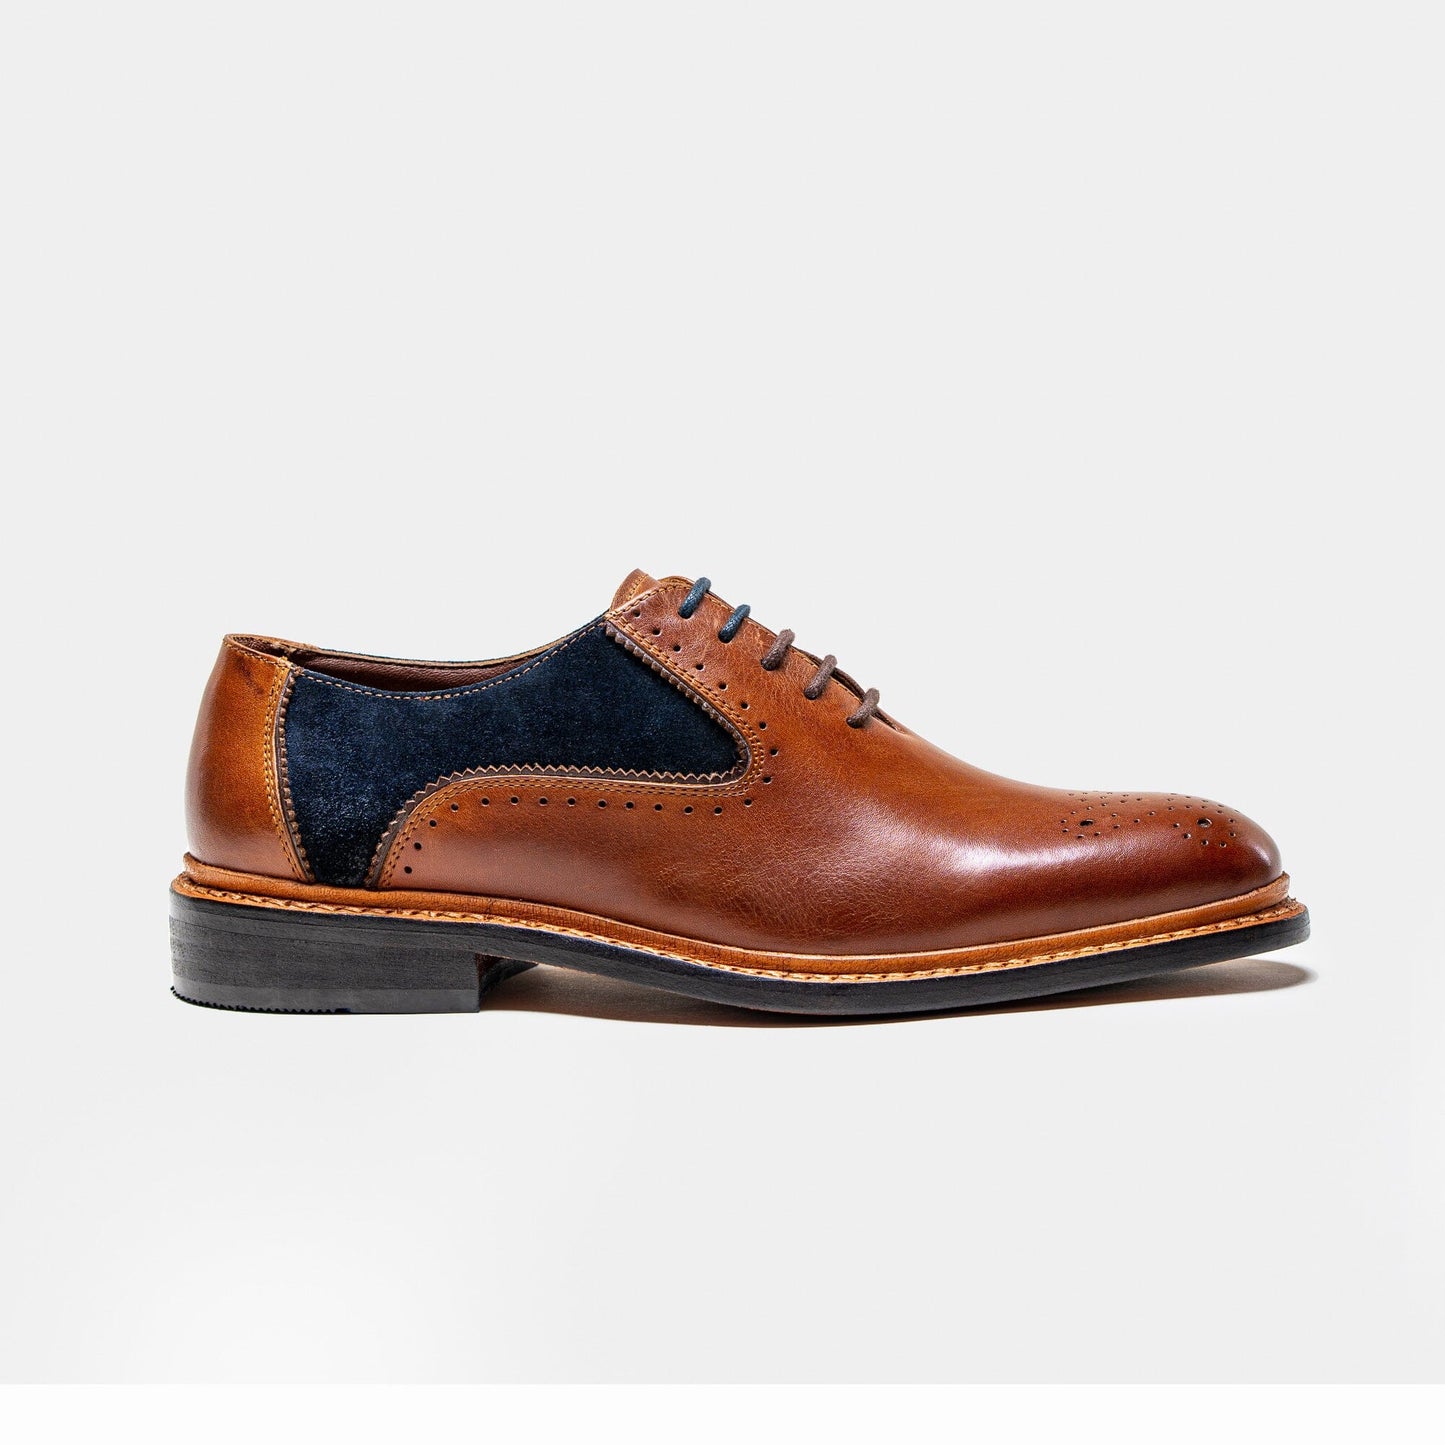 Brentwood Tan & Navy Shoes - Shoes - 7 - THREADPEPPER